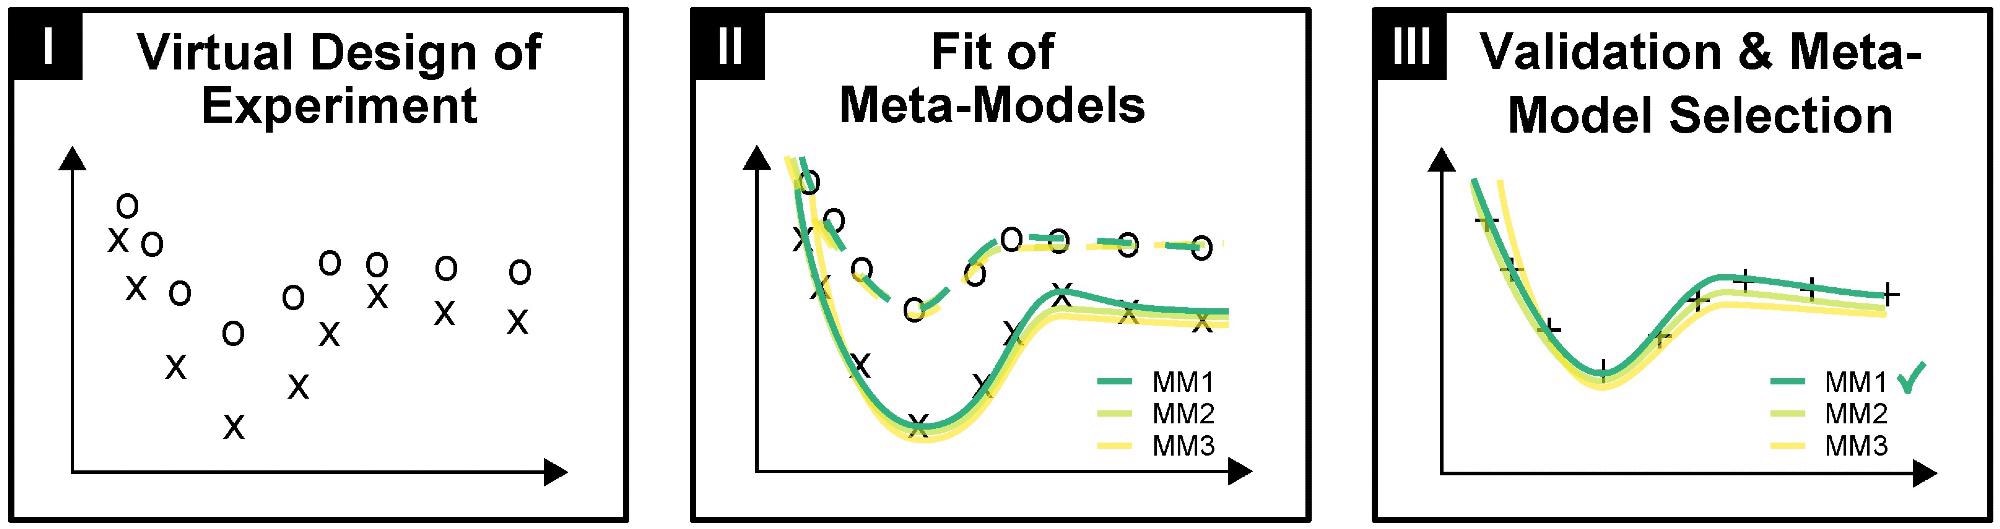 Meta-modeling approach consisting of (I) virtual design of experiment, (II) fit of meta-models, and (III) validation and meta-model selection.